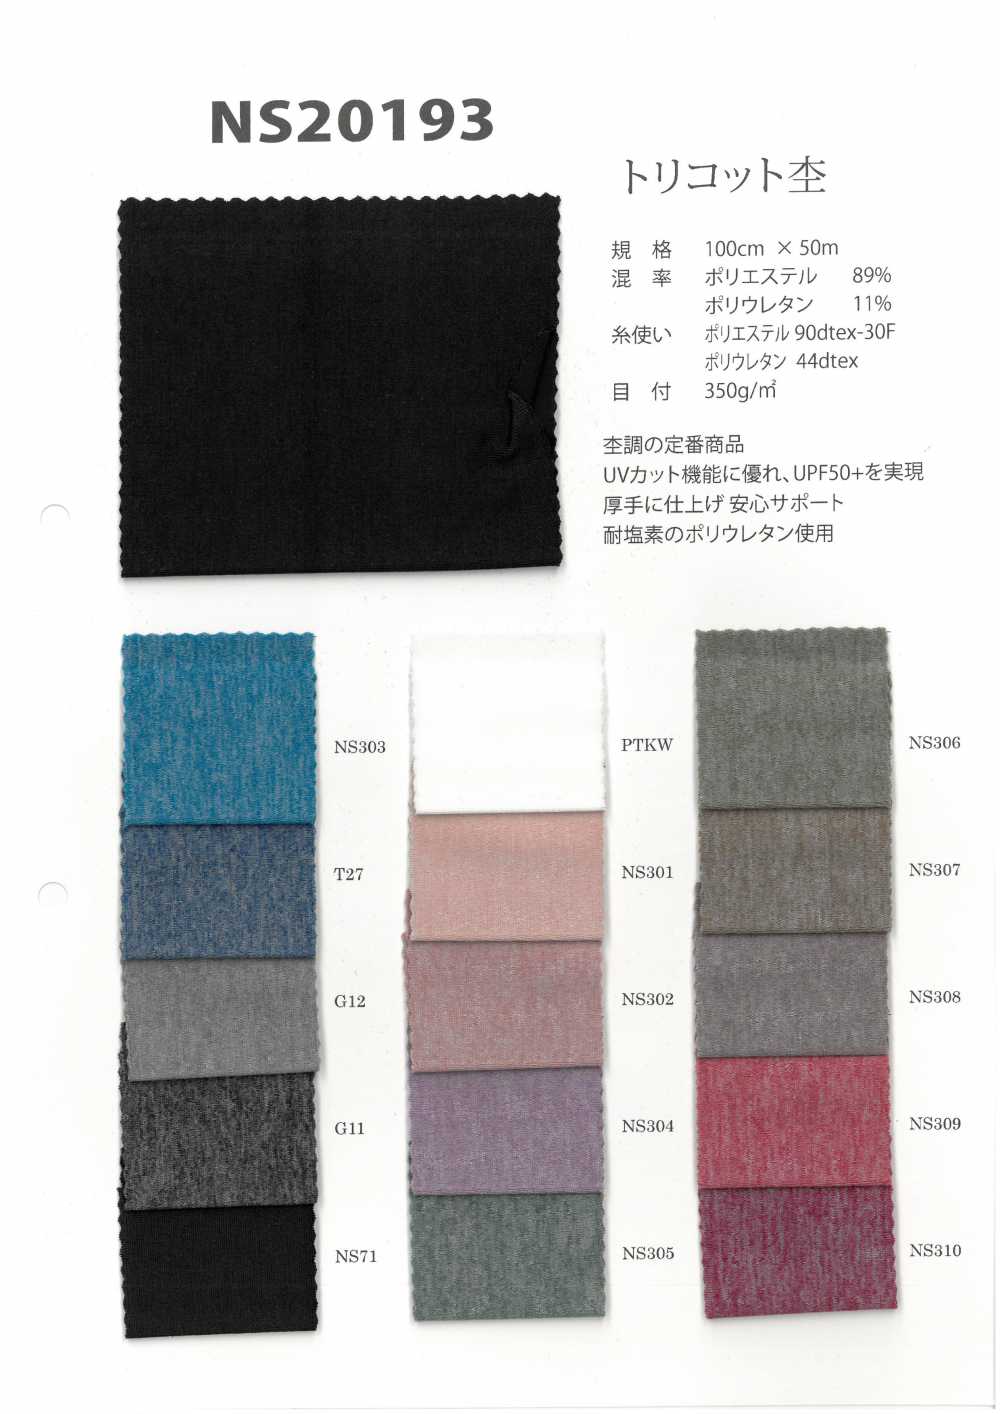 NS20193 Tricot Heather[Textile / Fabric] Japan Stretch